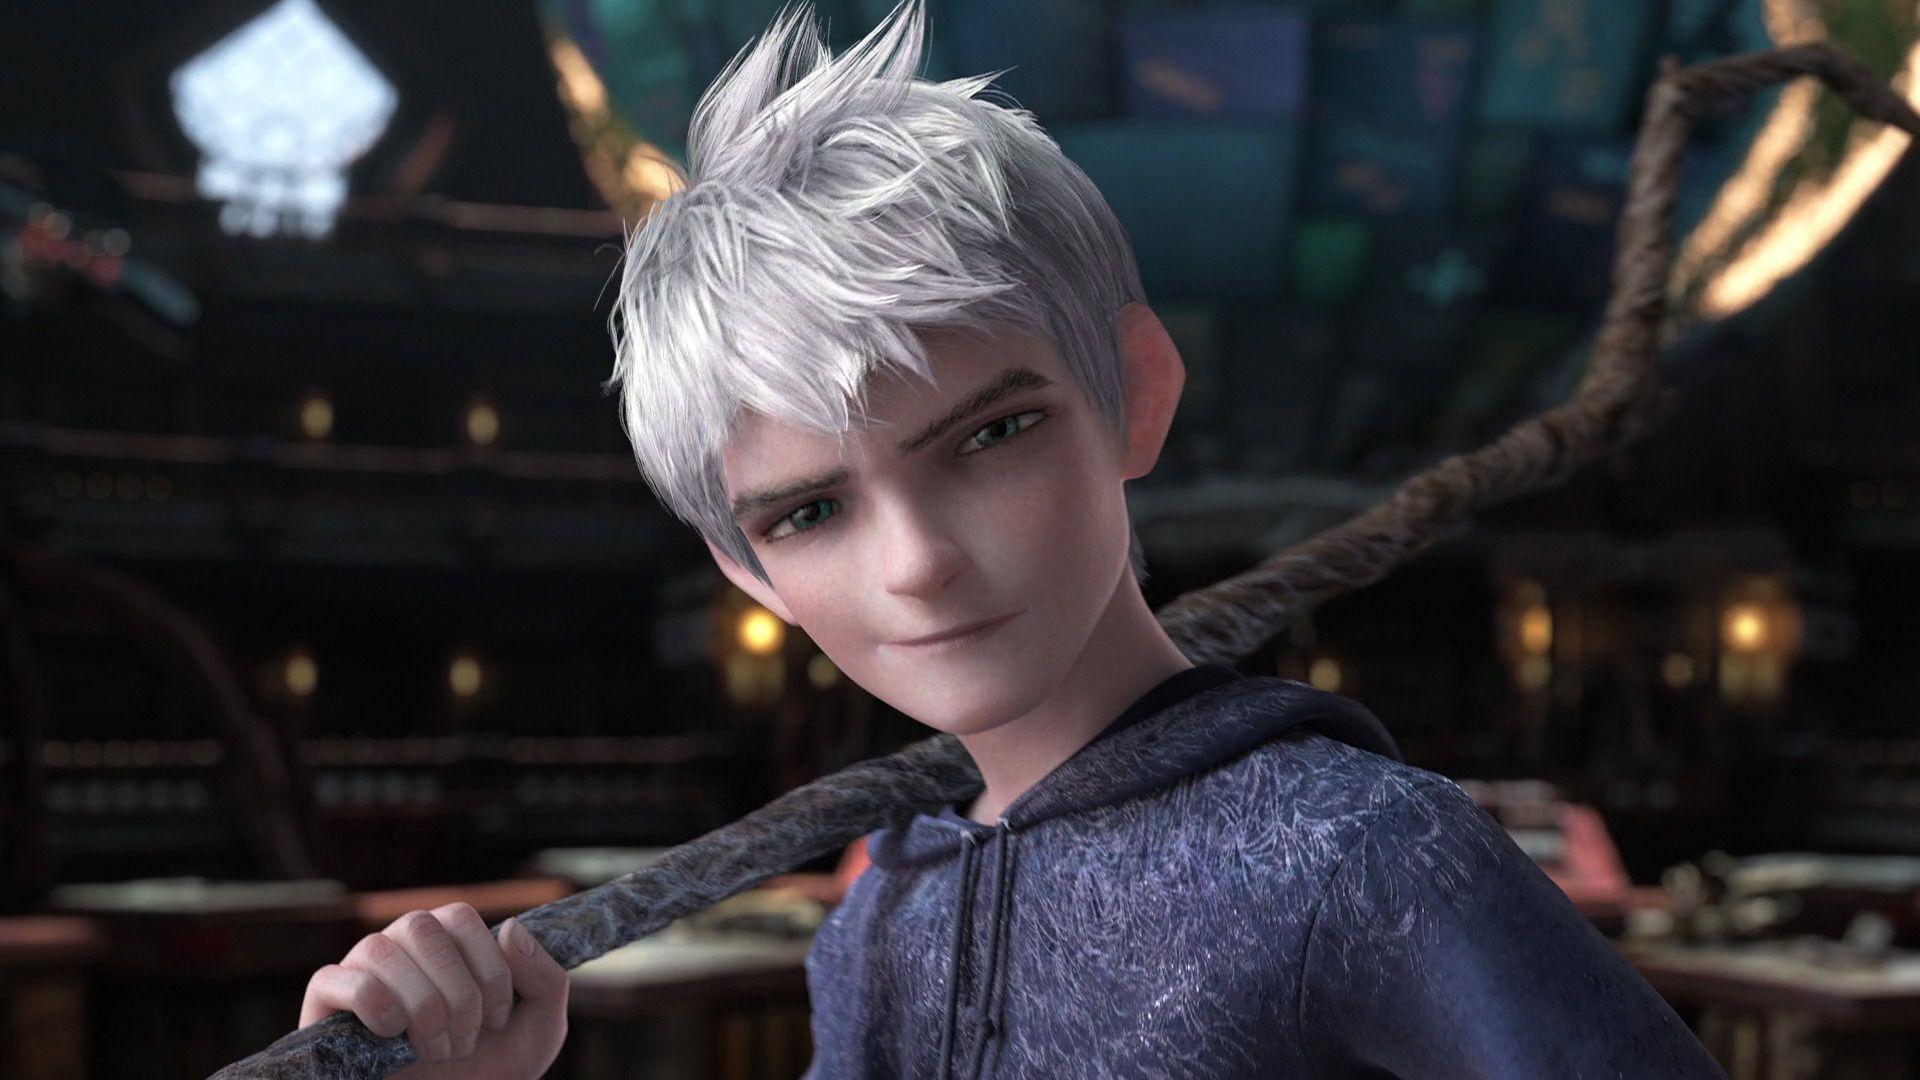 Best image about Jack Frost. How to paint, Jack